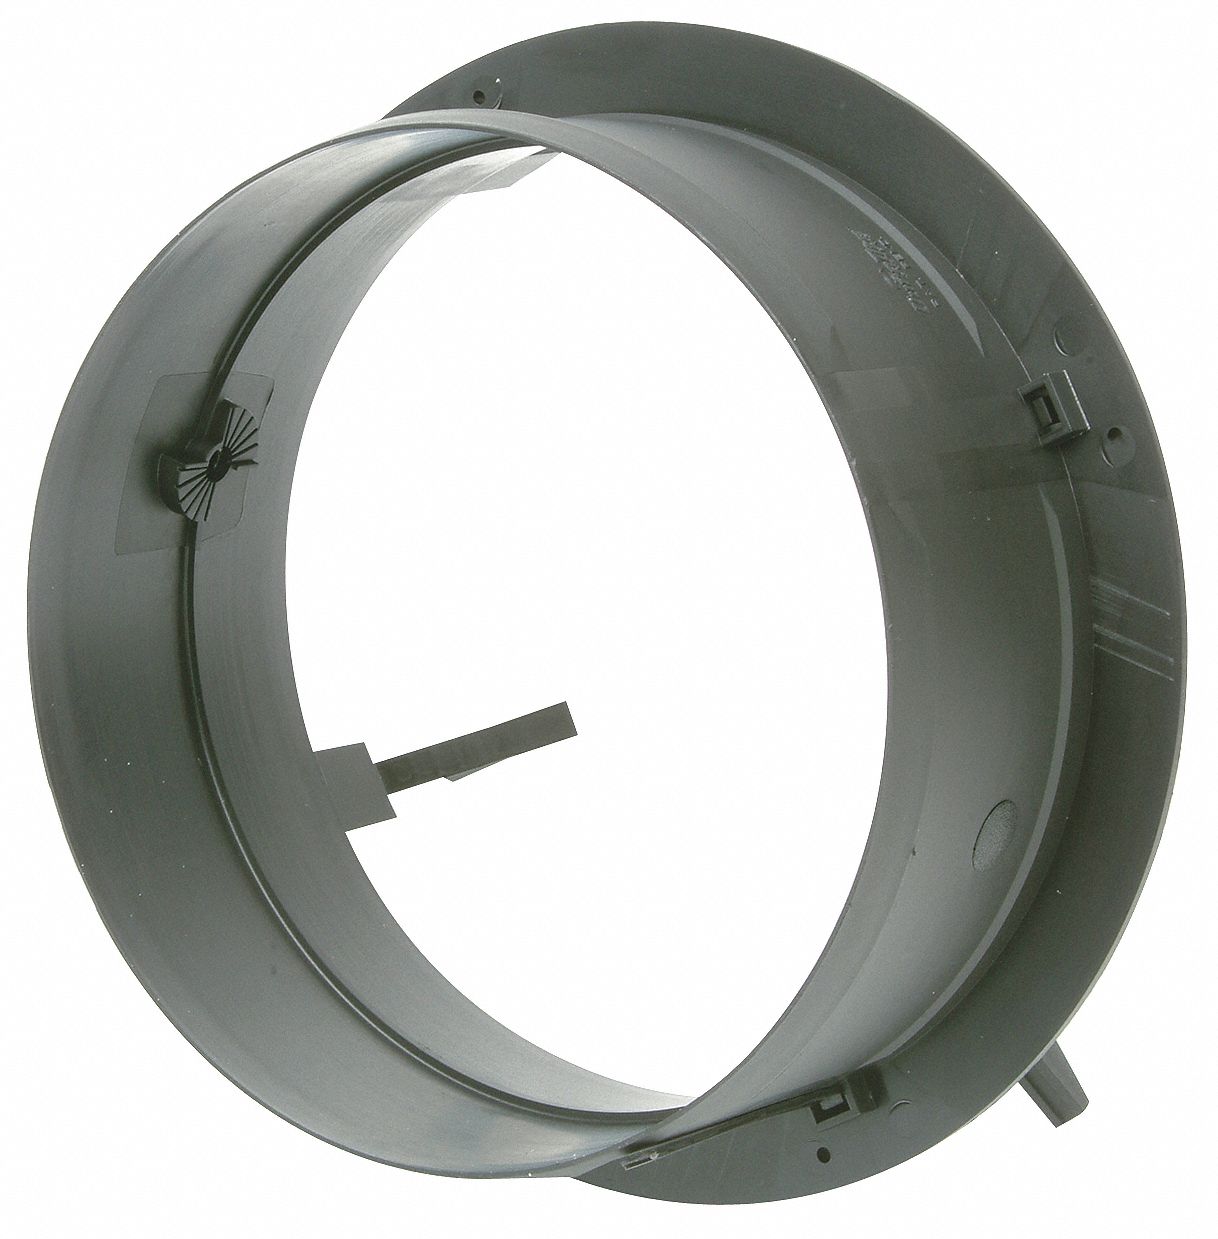 Duct Start/Take Off Collar: 6 Duct Size (In.), Plastic